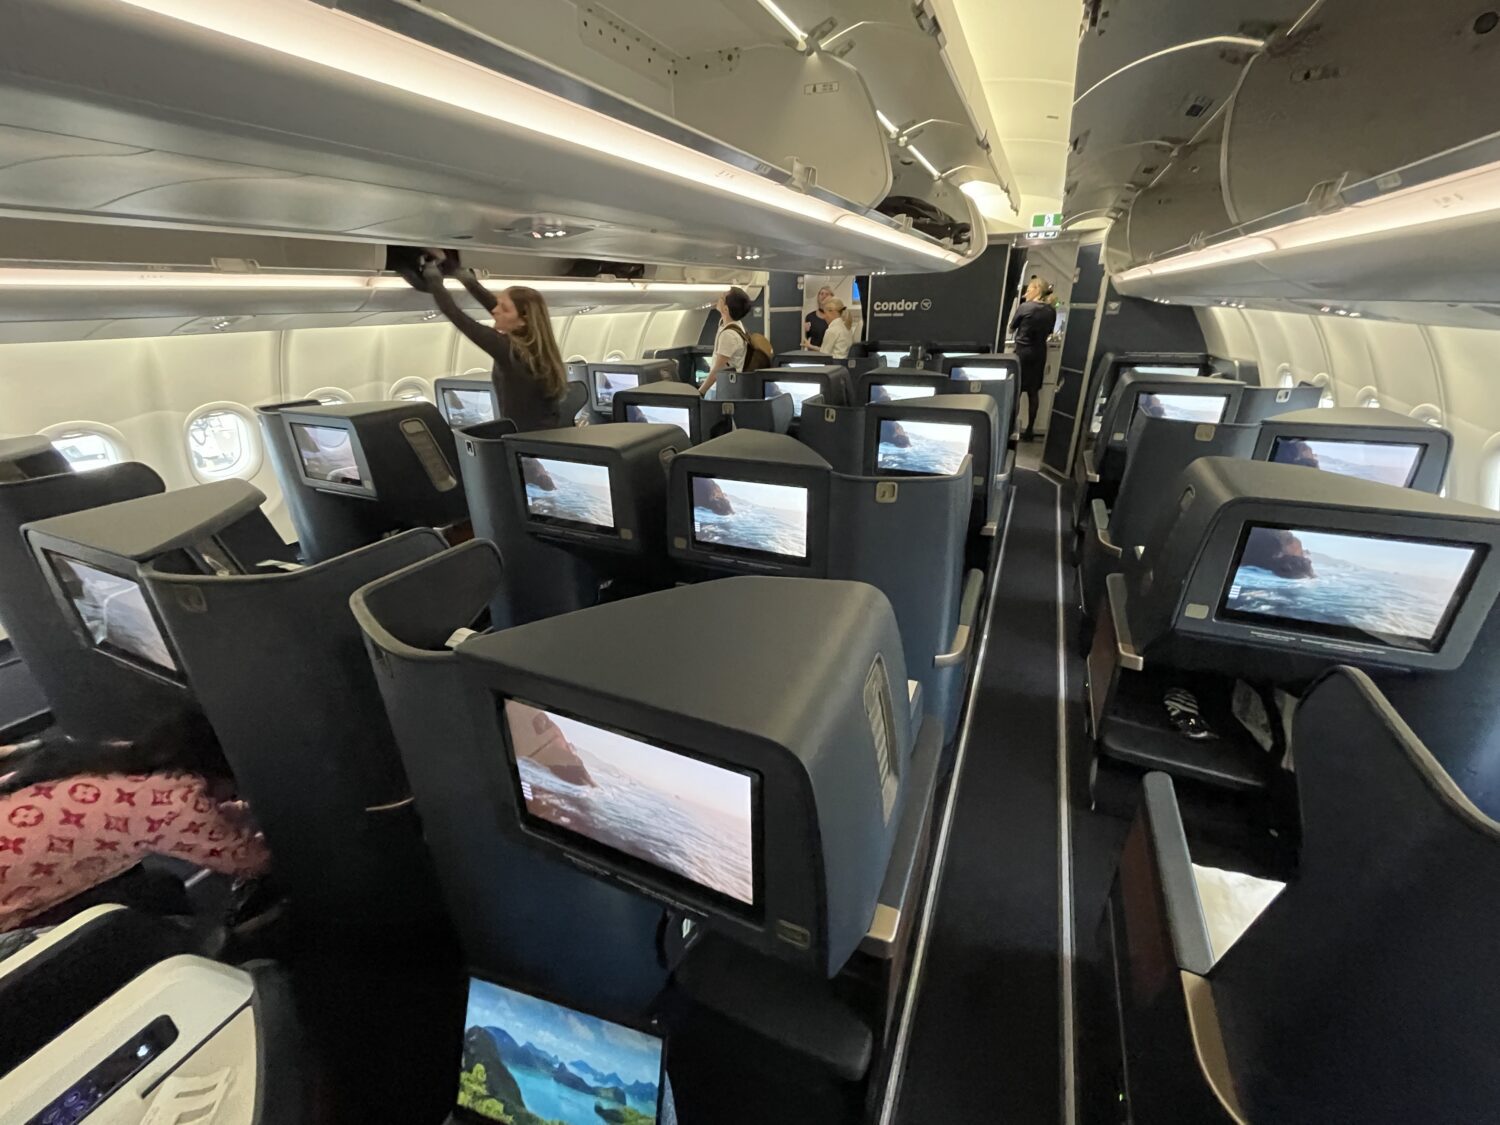 Condor Airlines Business Class Cabin